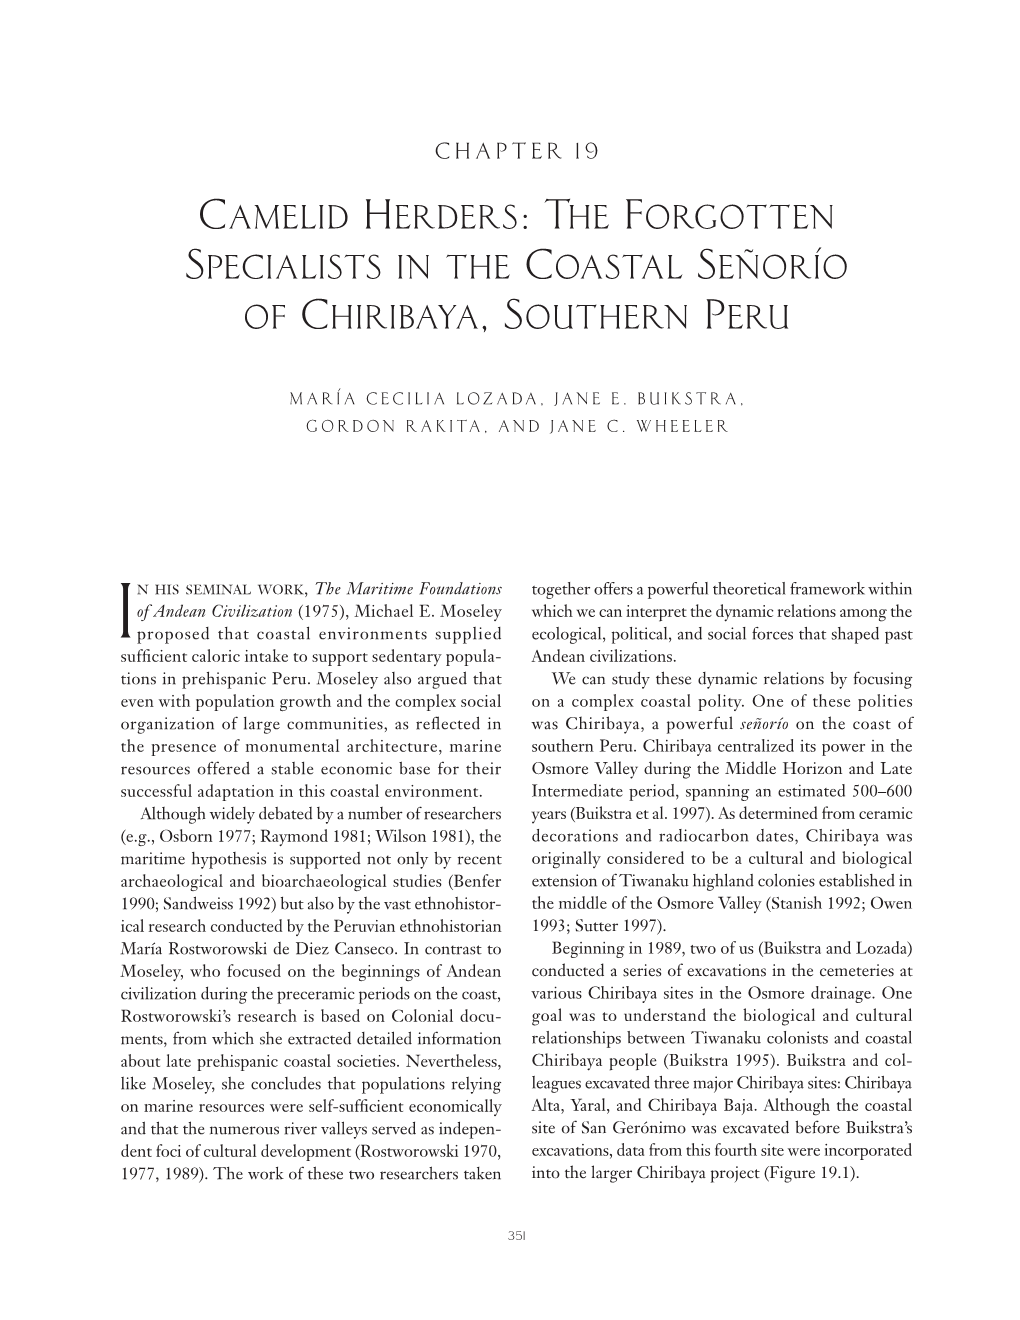 Camelid Herders: the Forgotten Specialists in the Coastal Señorío of Chiribaya, Southern Peru